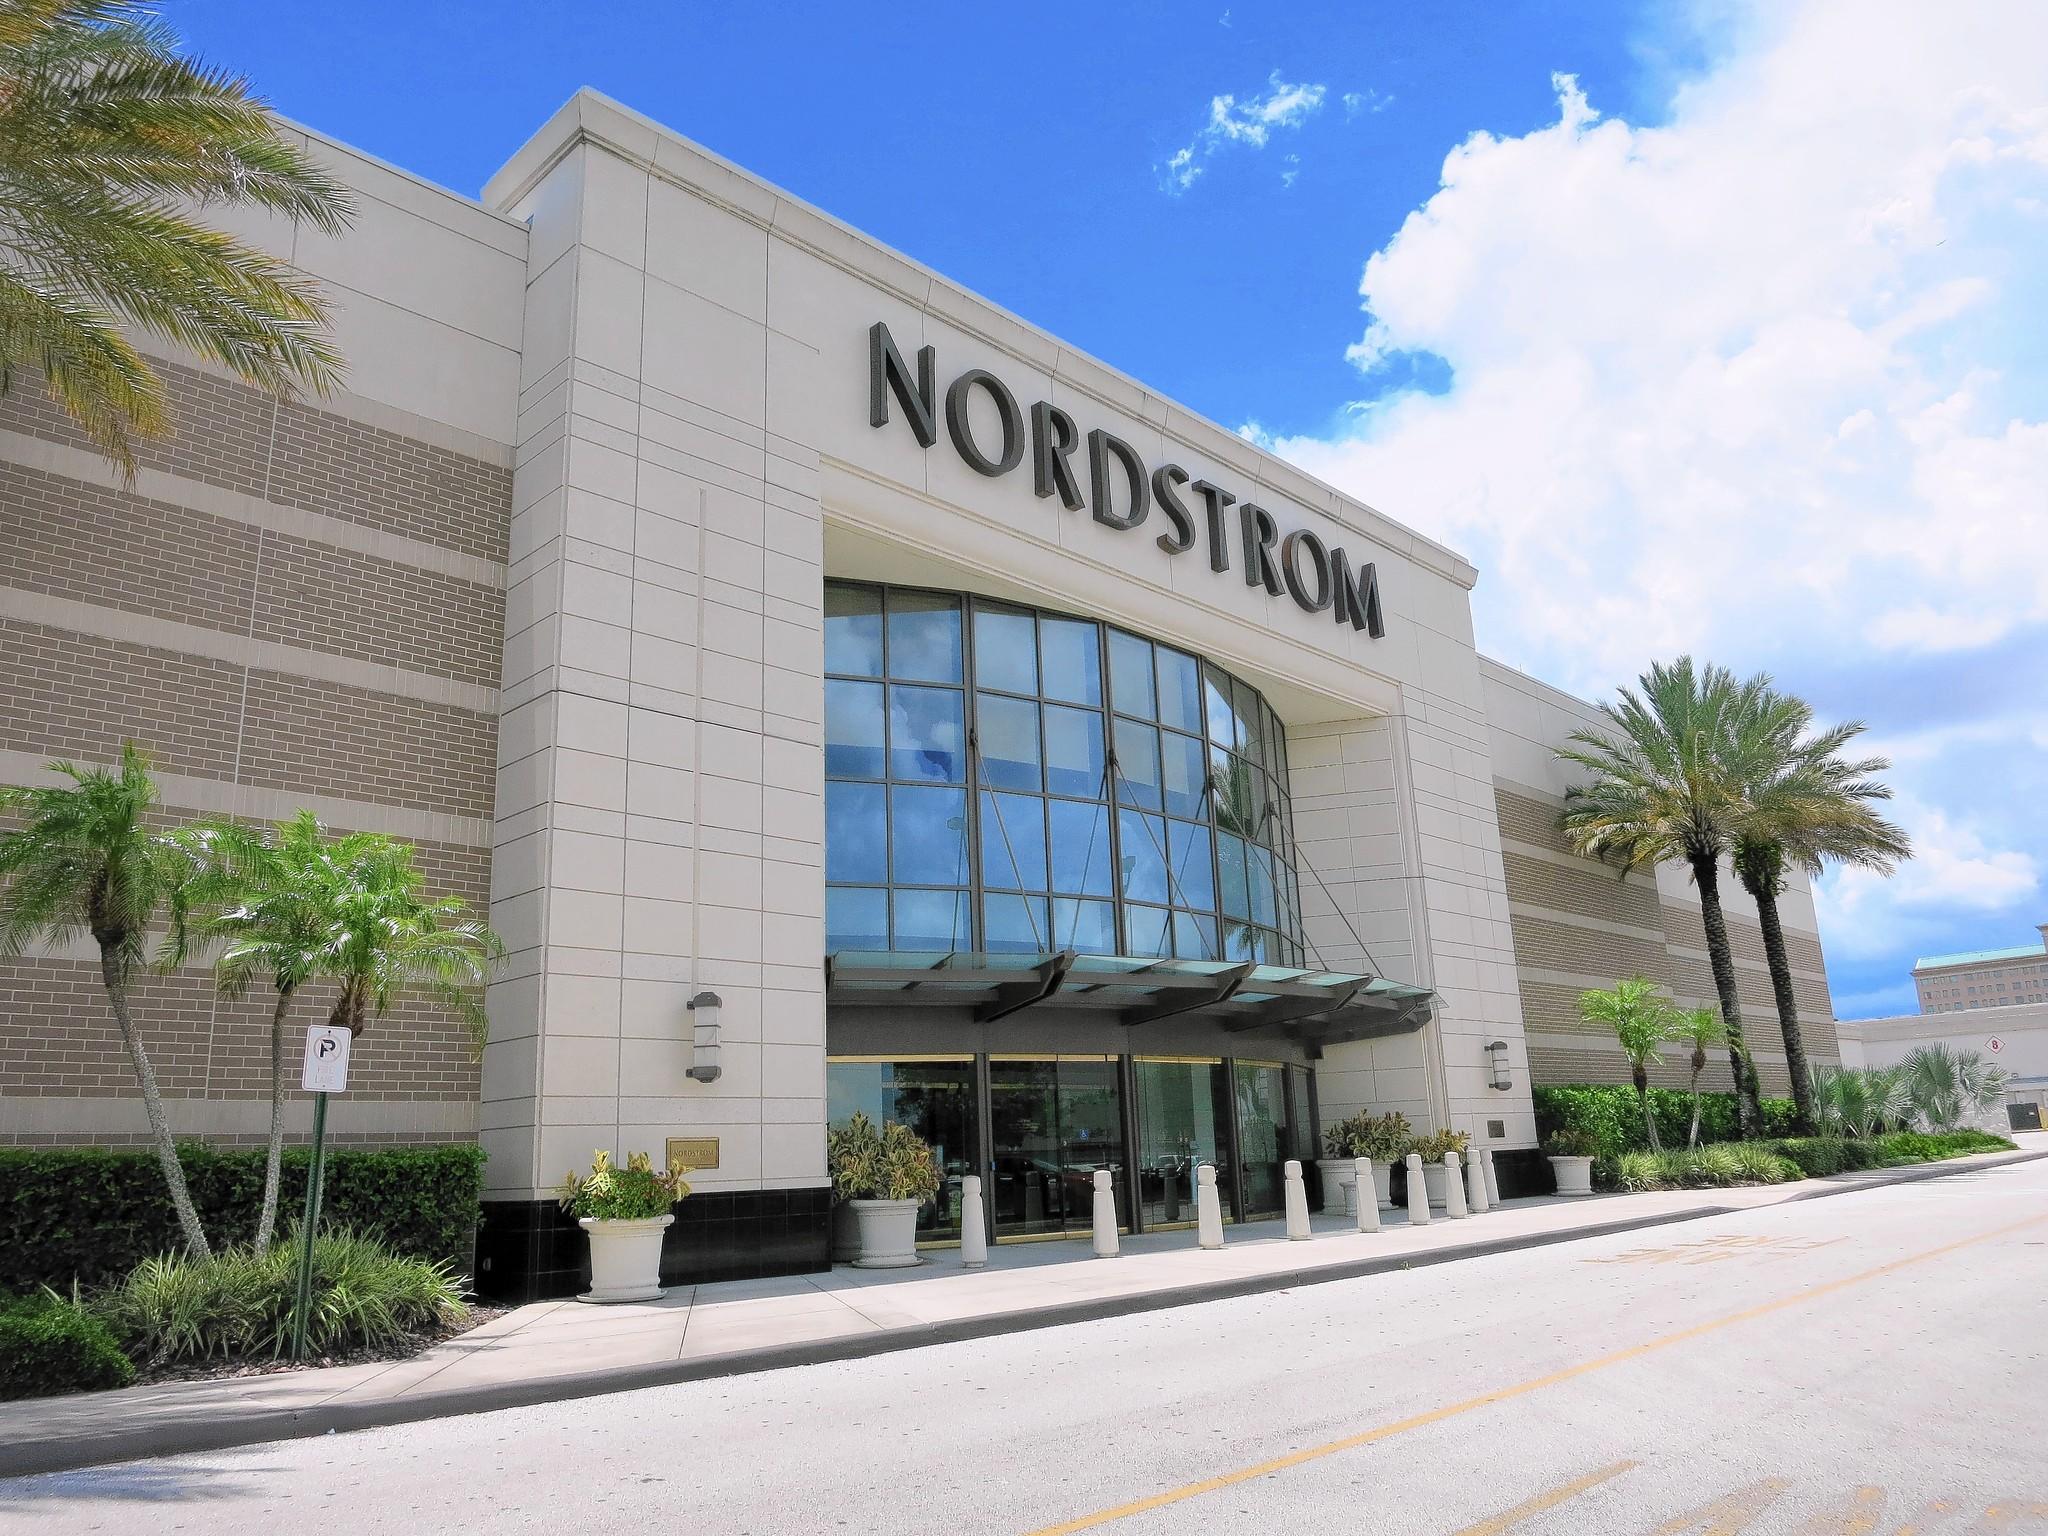 Nordstrom fell to upscale and outlet competition, analysts say ...